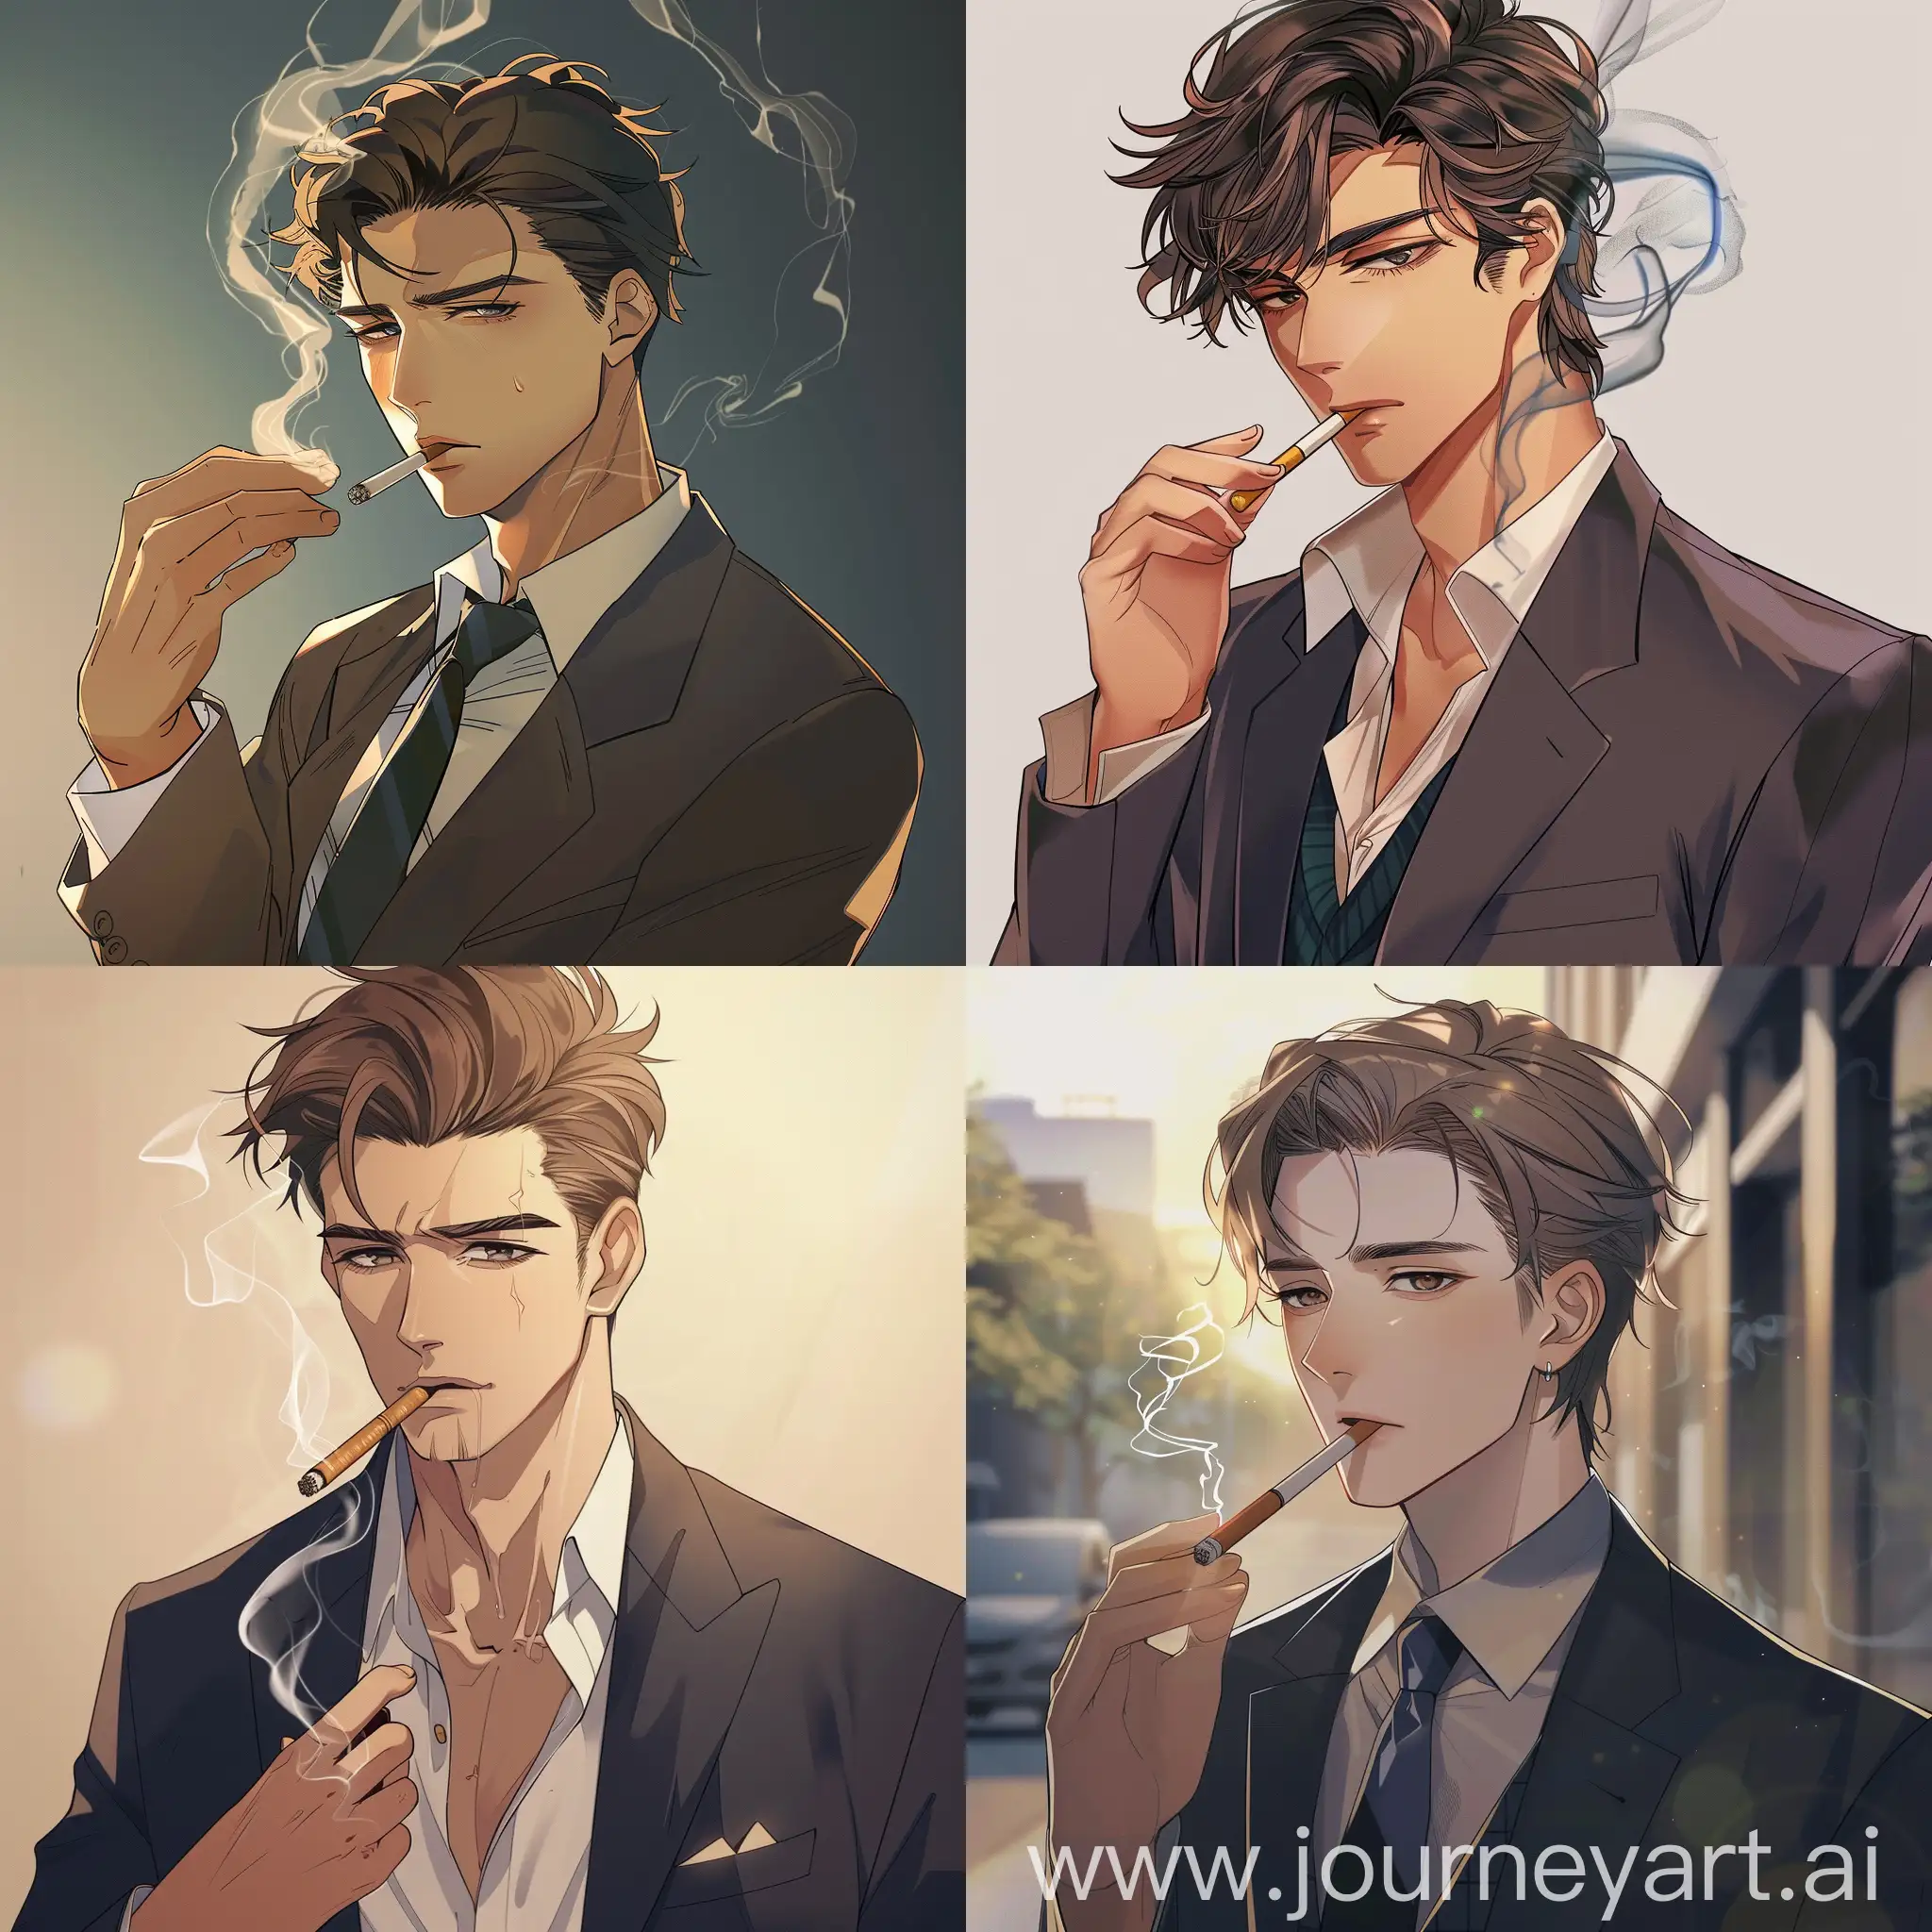 A hot guy who looks like in his 40s wearing a suit while smoking in anime style